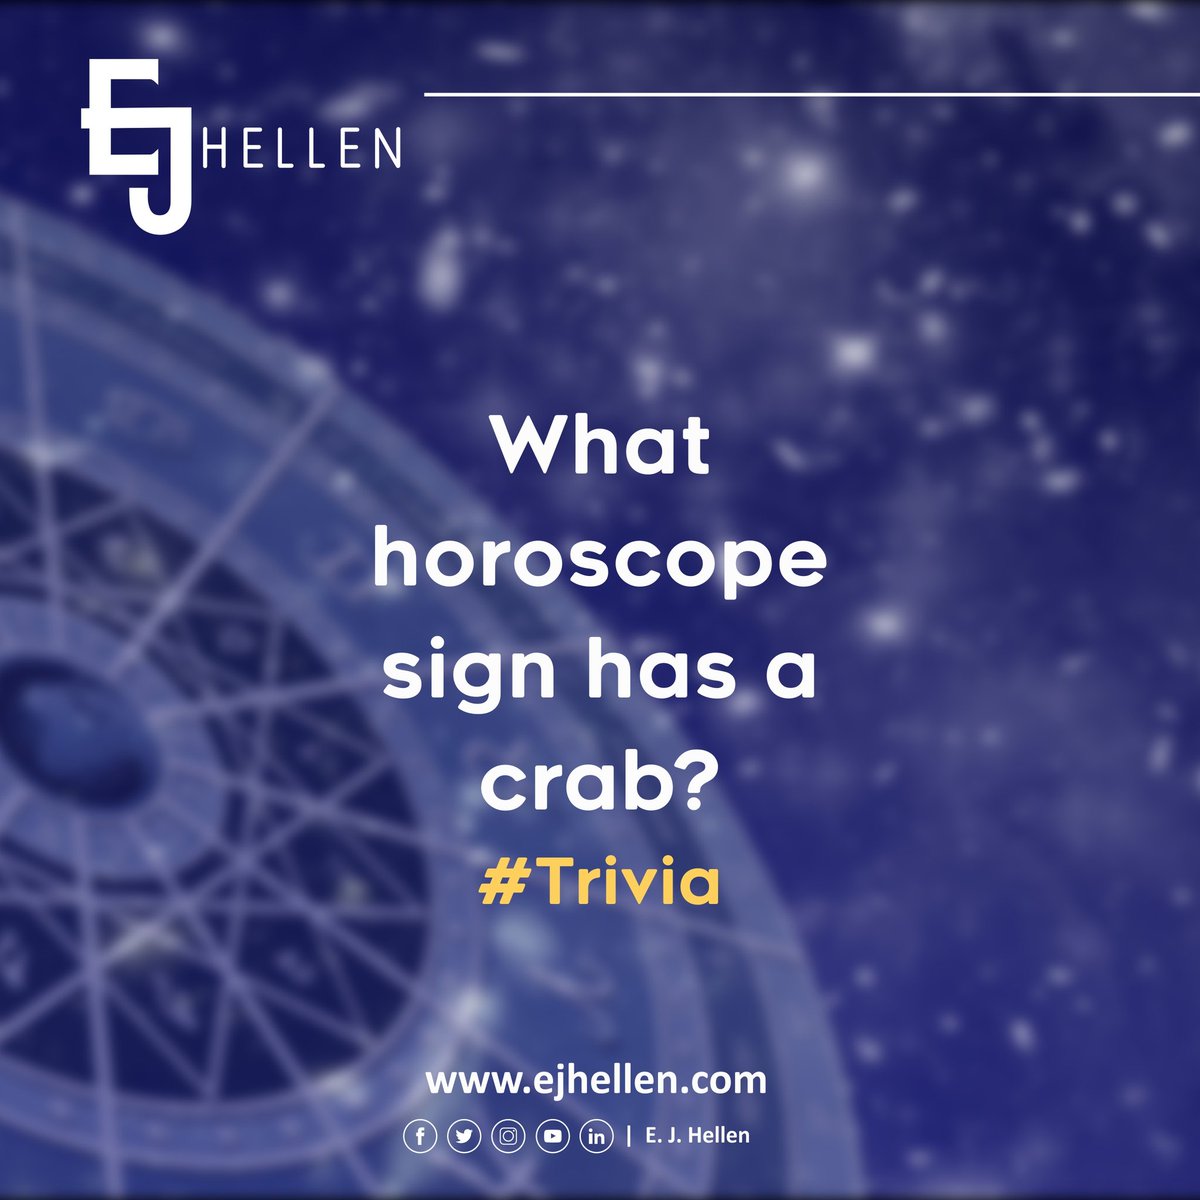 Here's our Friday trivia😊
Let's see who gets it first. 
What horoscope sign has a crab? 
#ejhellen #fashiondesignersinnigeria #trivia #trivianight #trivianation #allure